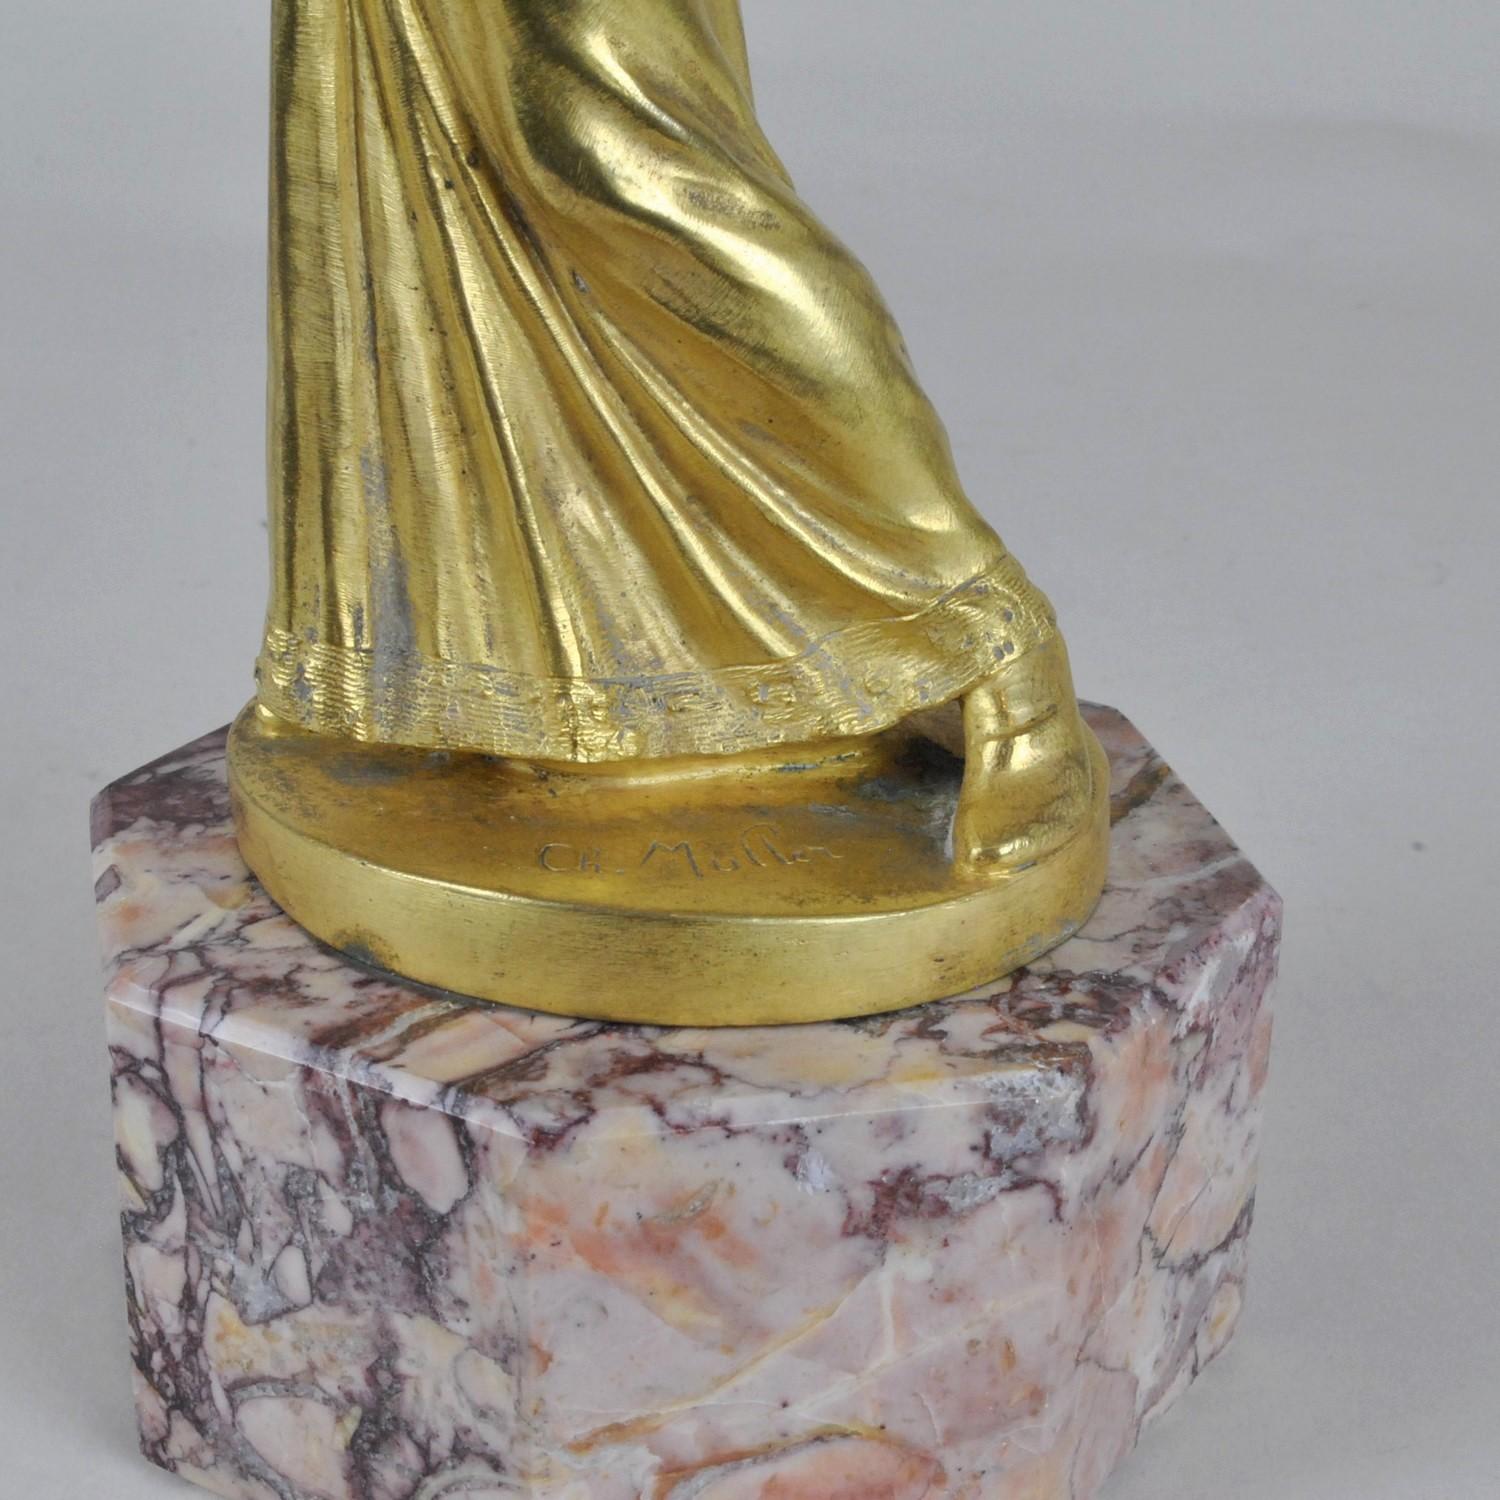 Muller, Priestess, Gilt Bronze Signed, Late 19th Century Early 20th Century For Sale 6